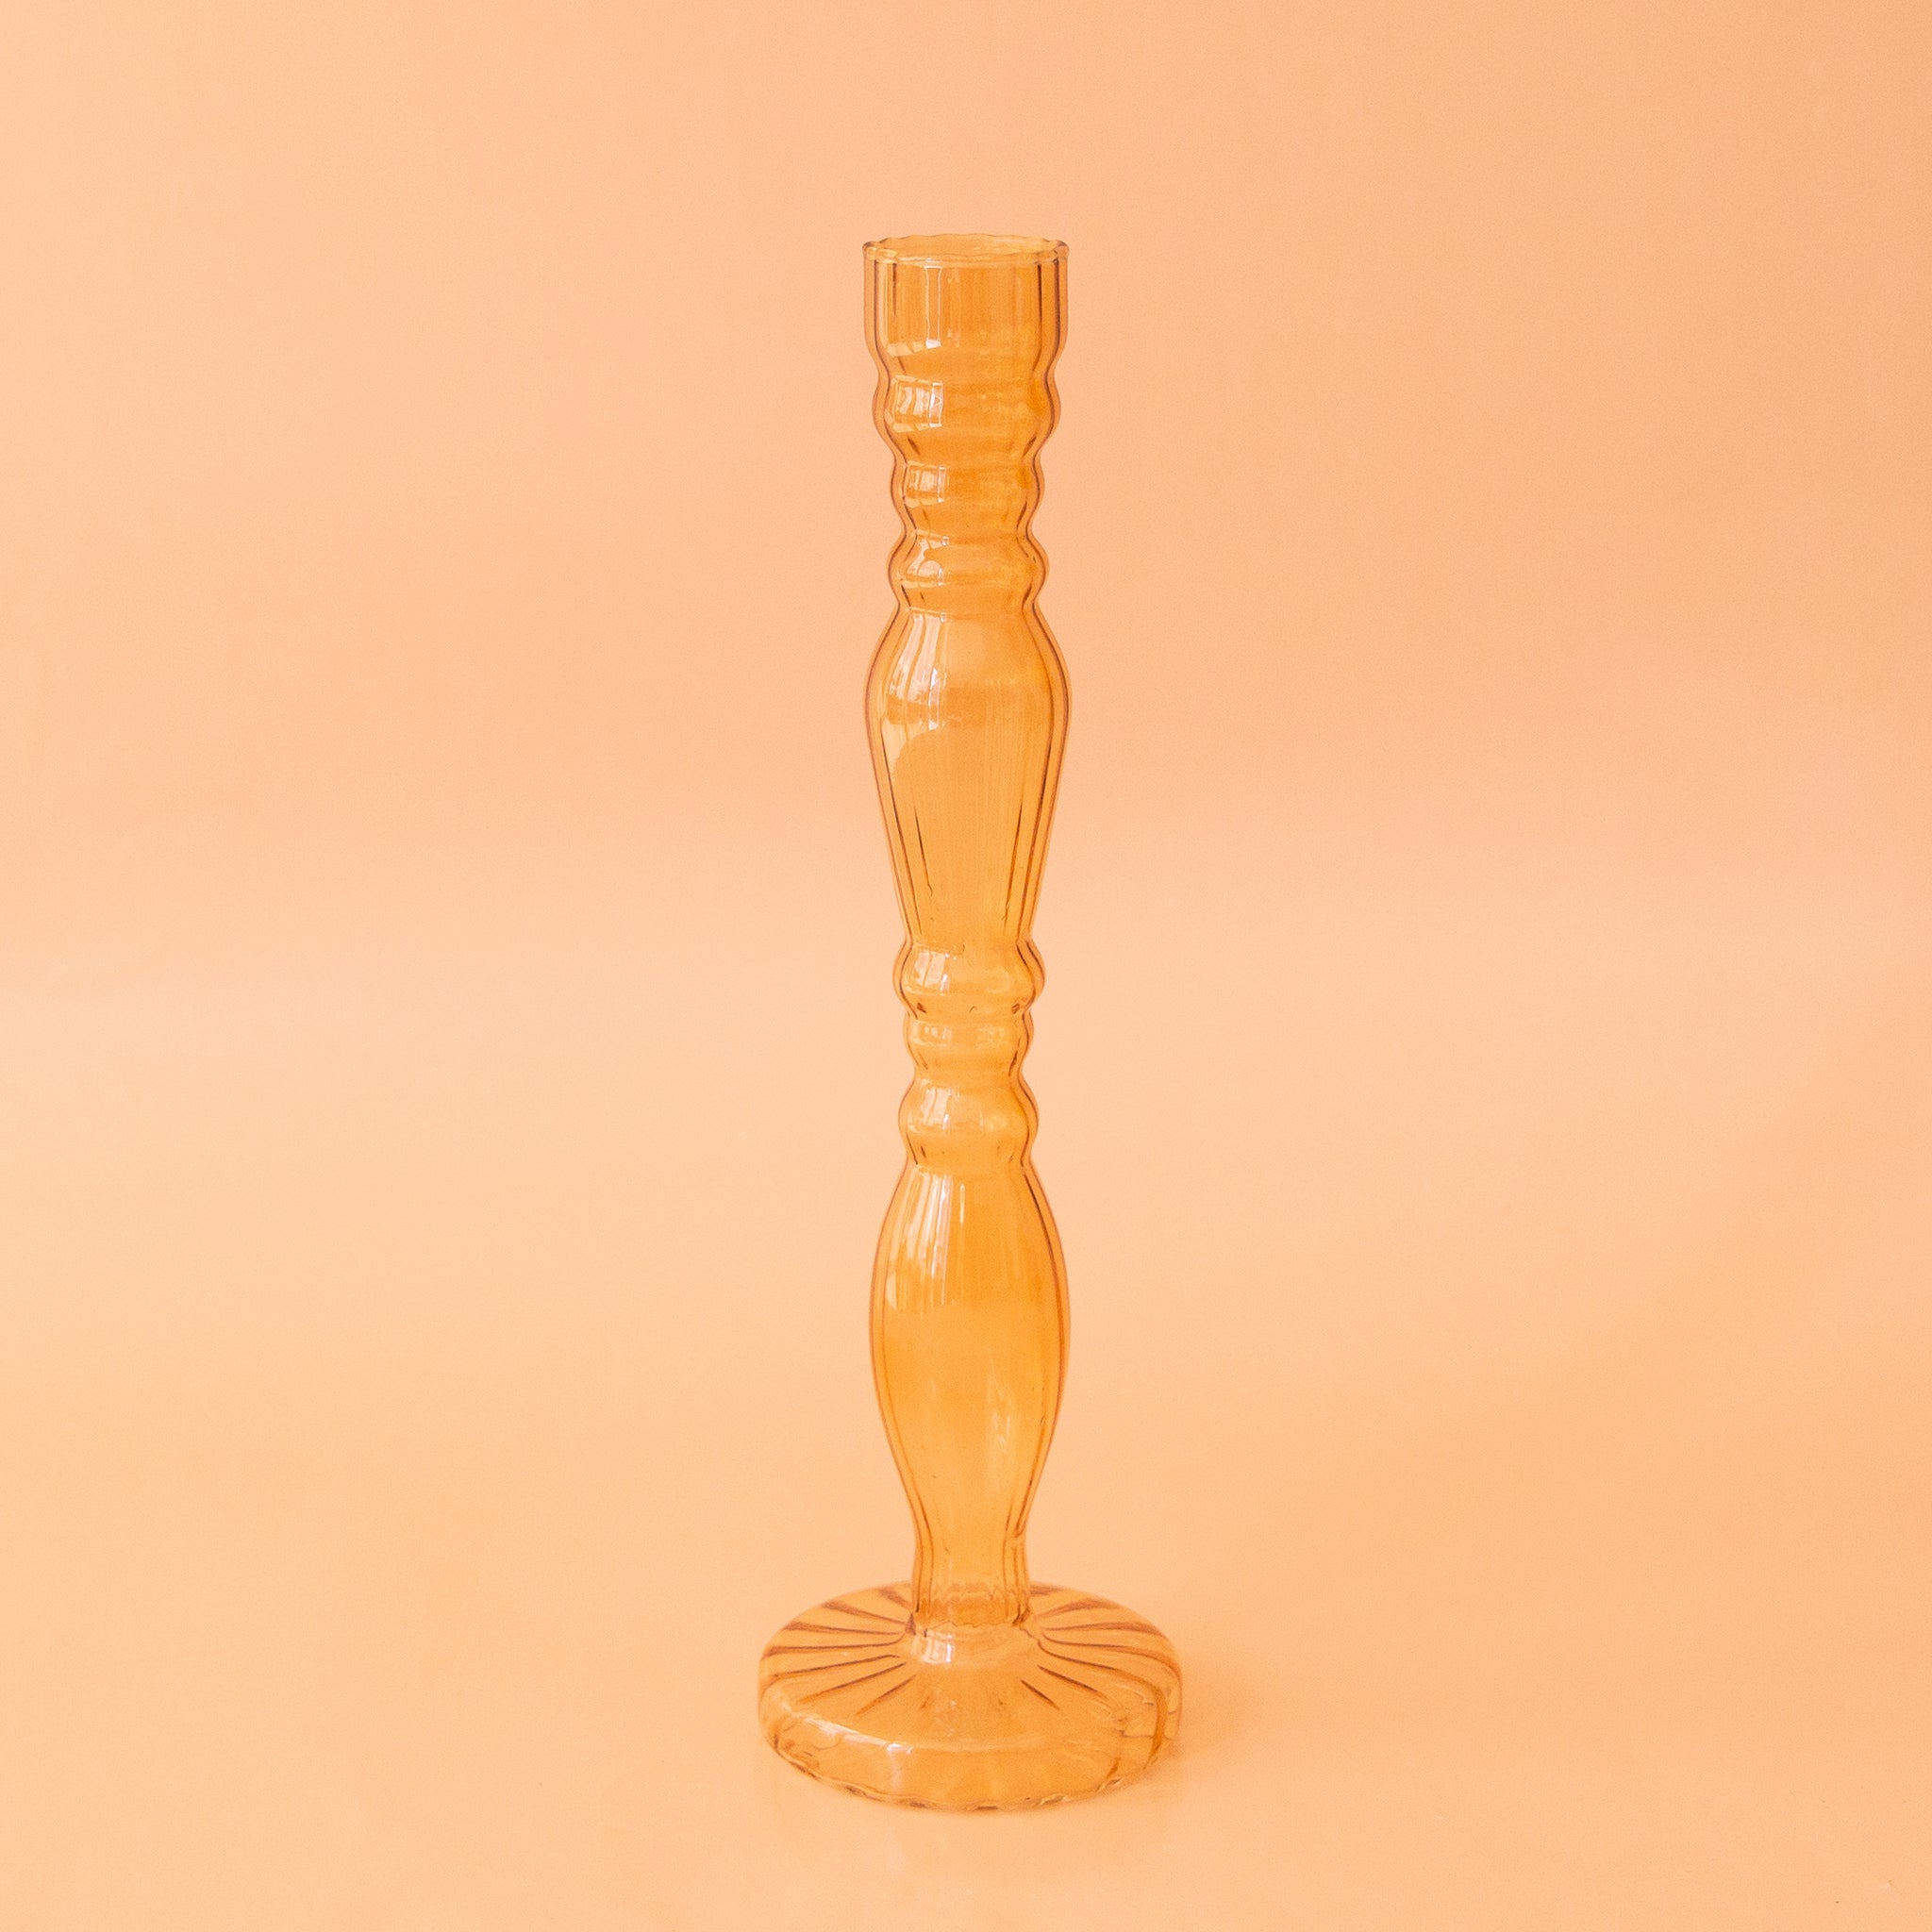 A yellow bud vase with intricate details and made of glass.